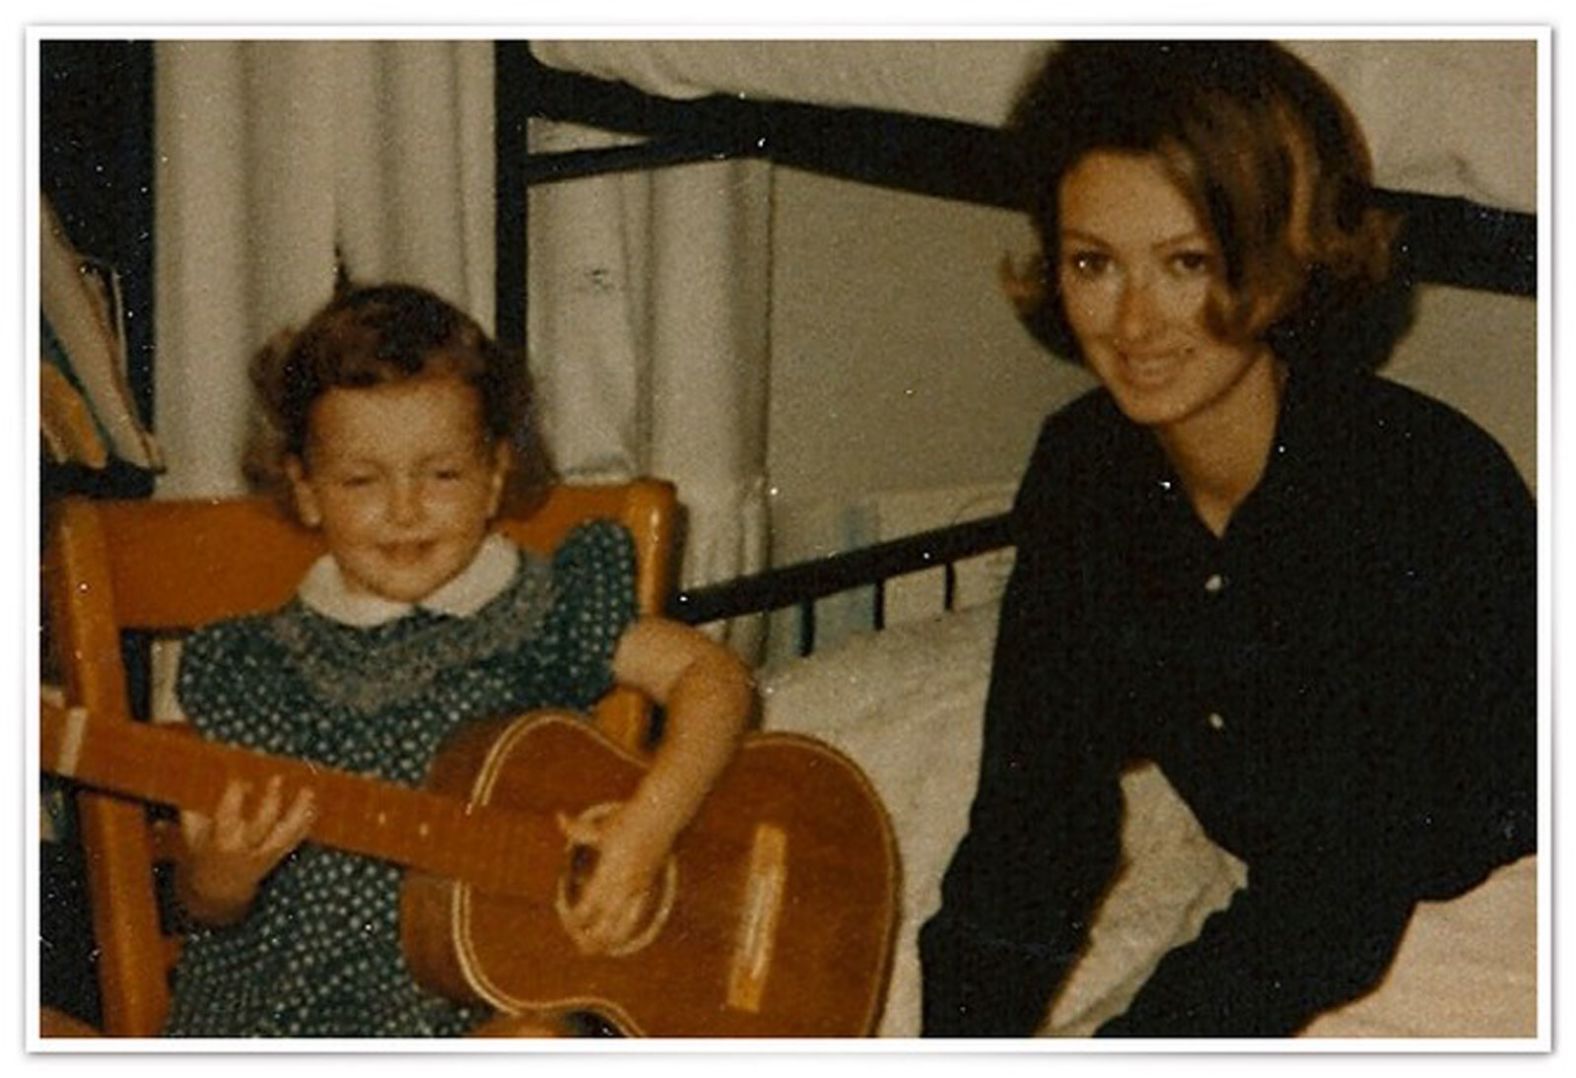 Wynonna Judd, left, shows off her first toy guitar in 1970.